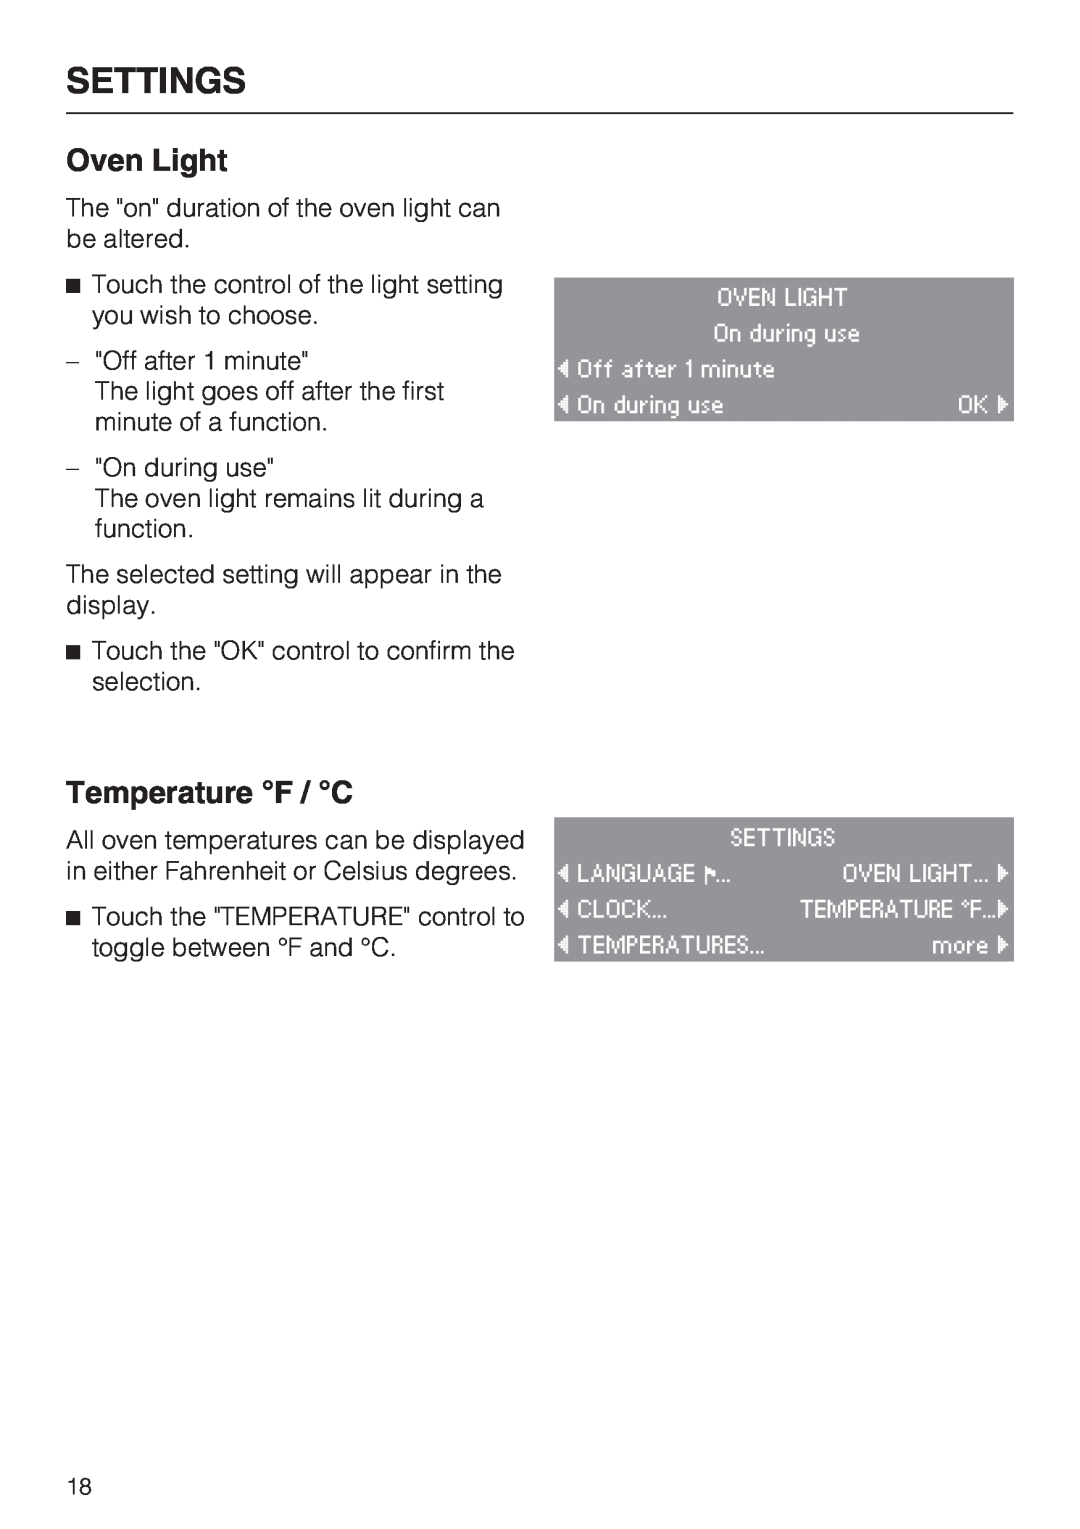 Miele H 4894 BP2 installation instructions Oven Light, Temperature F / C, Settings 